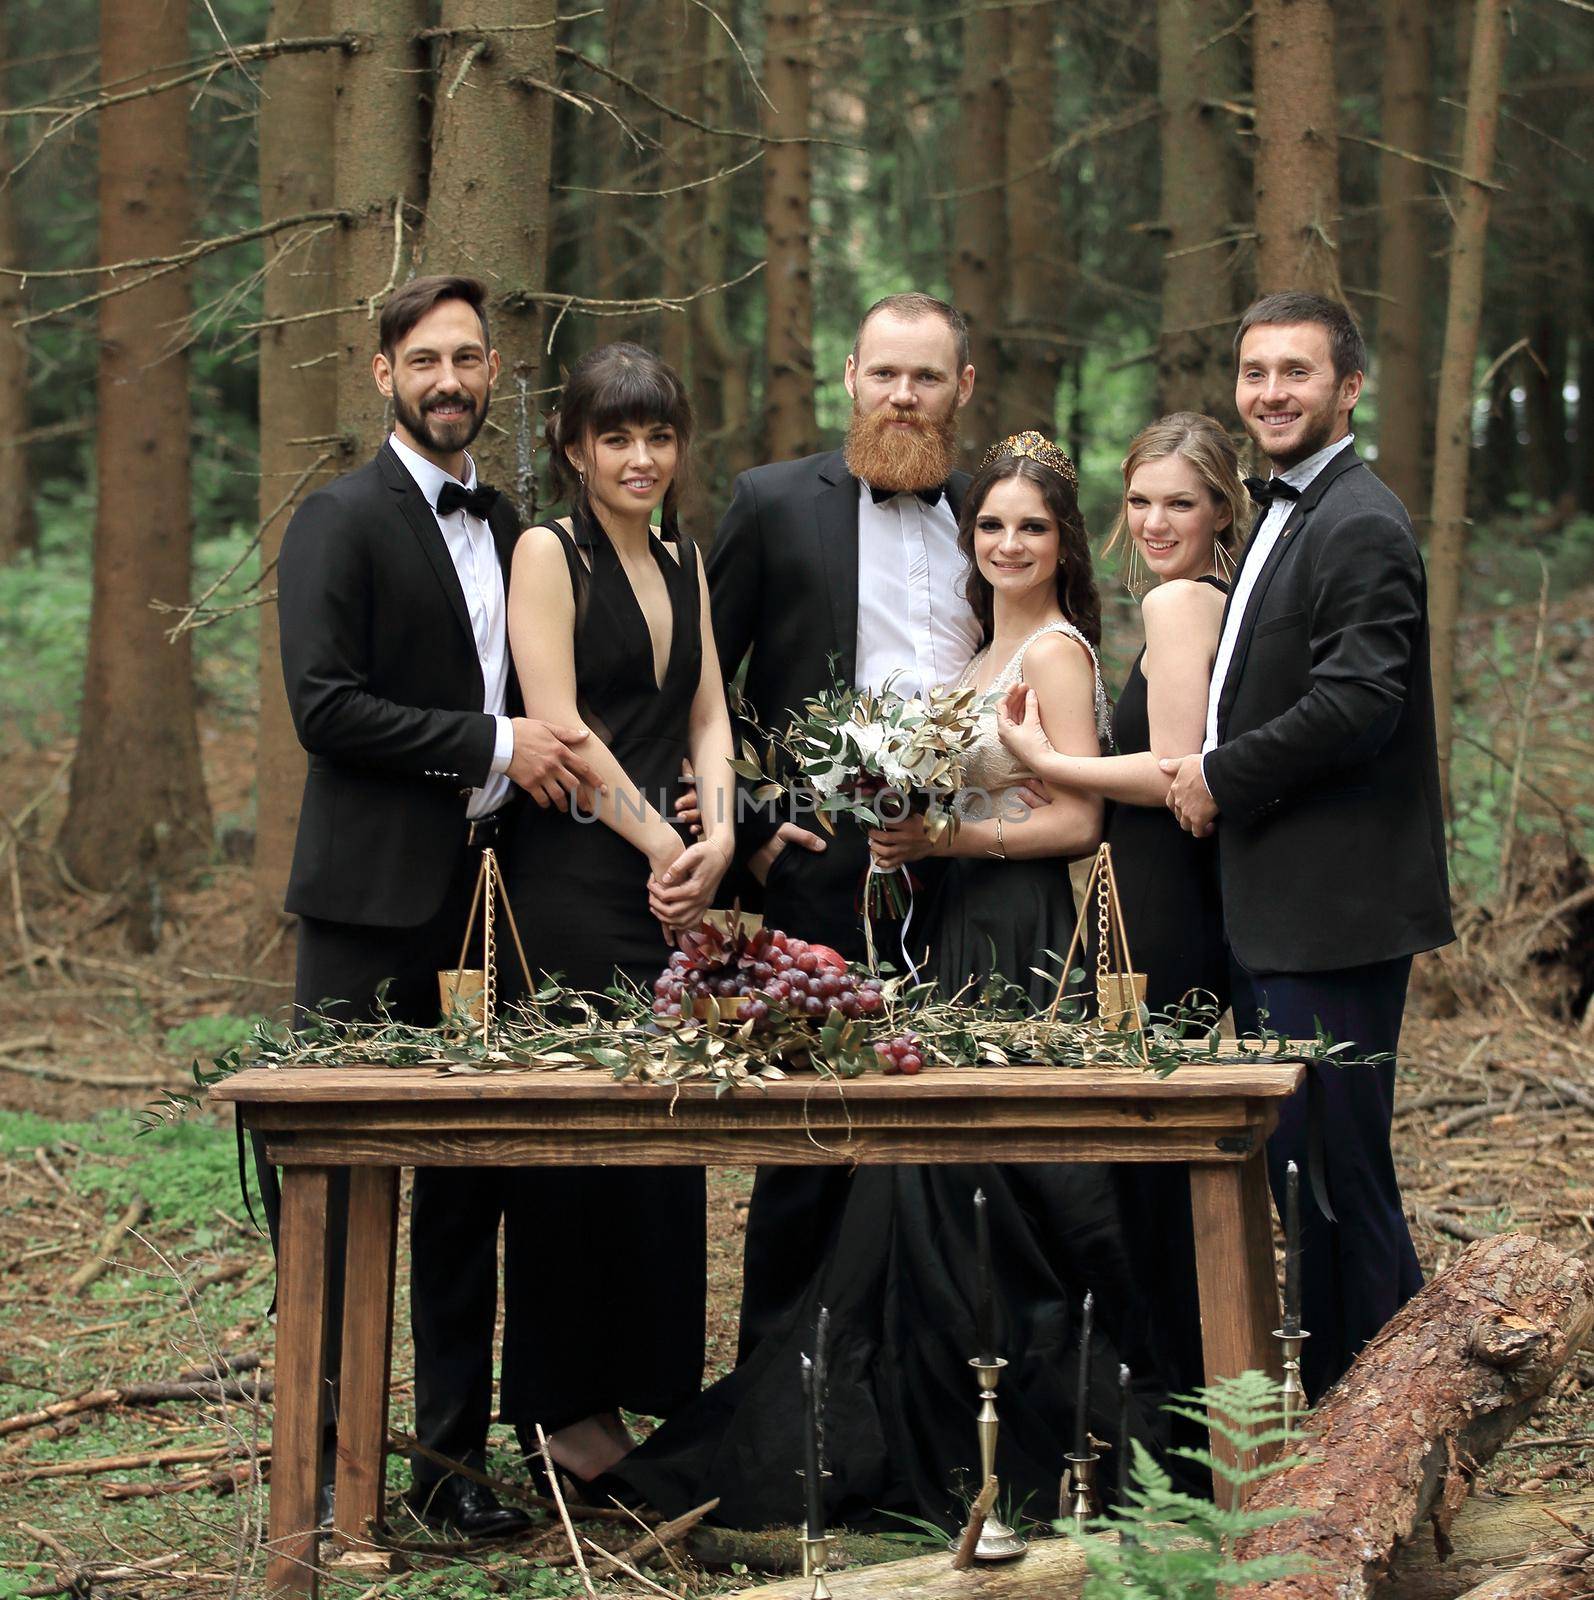 guests and a couple of newlyweds near the picnic table in the woods by SmartPhotoLab